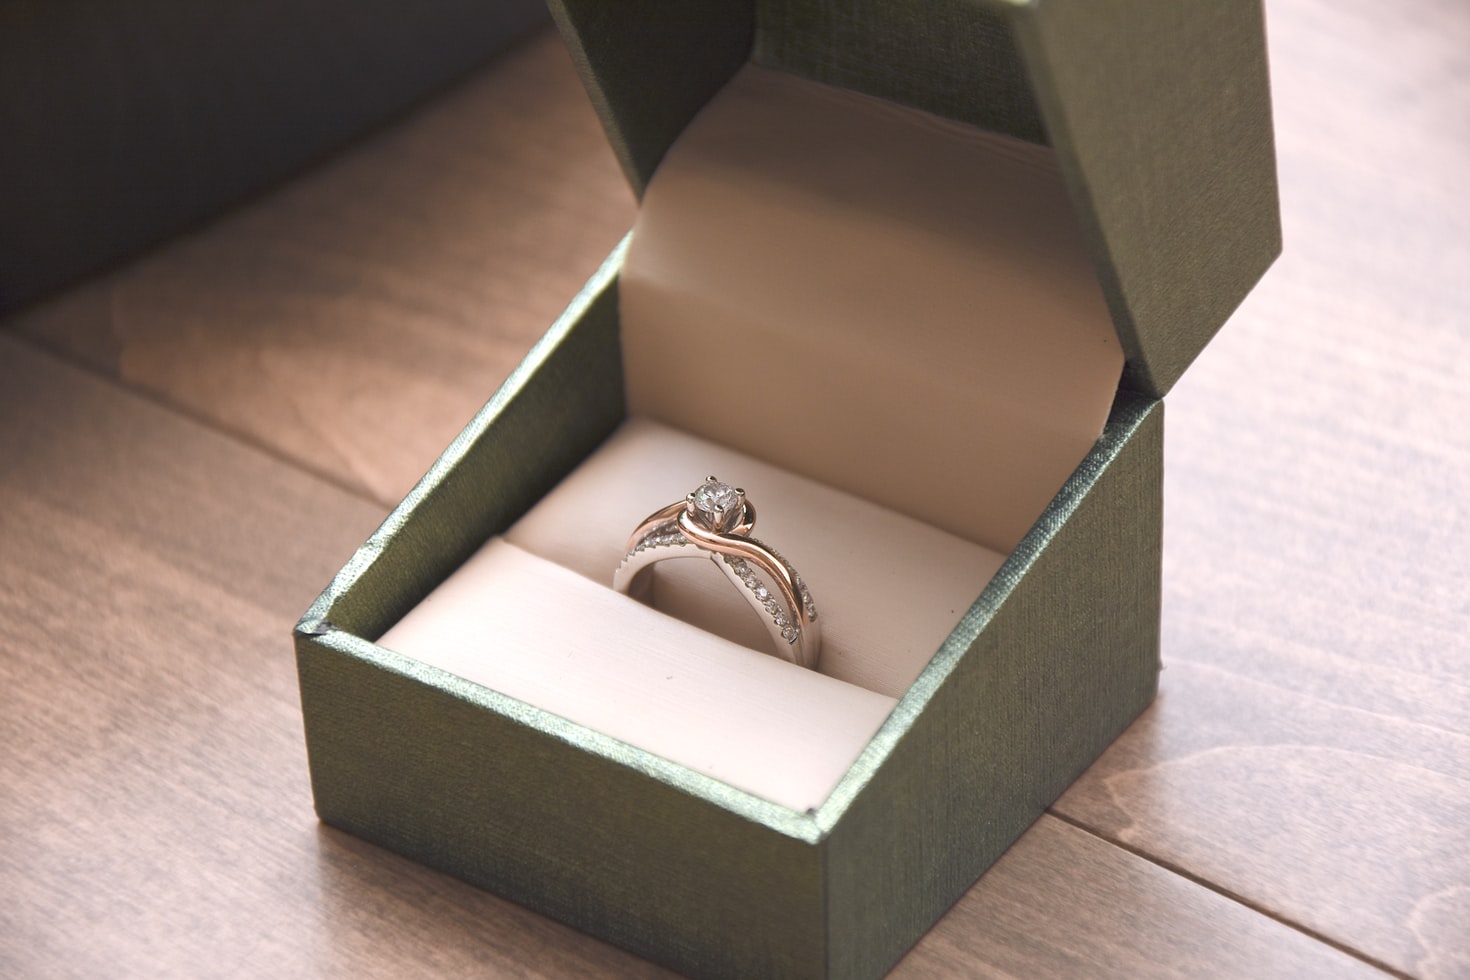 Benefits of shopping for an engagement ring online and important tips to help you shop safely